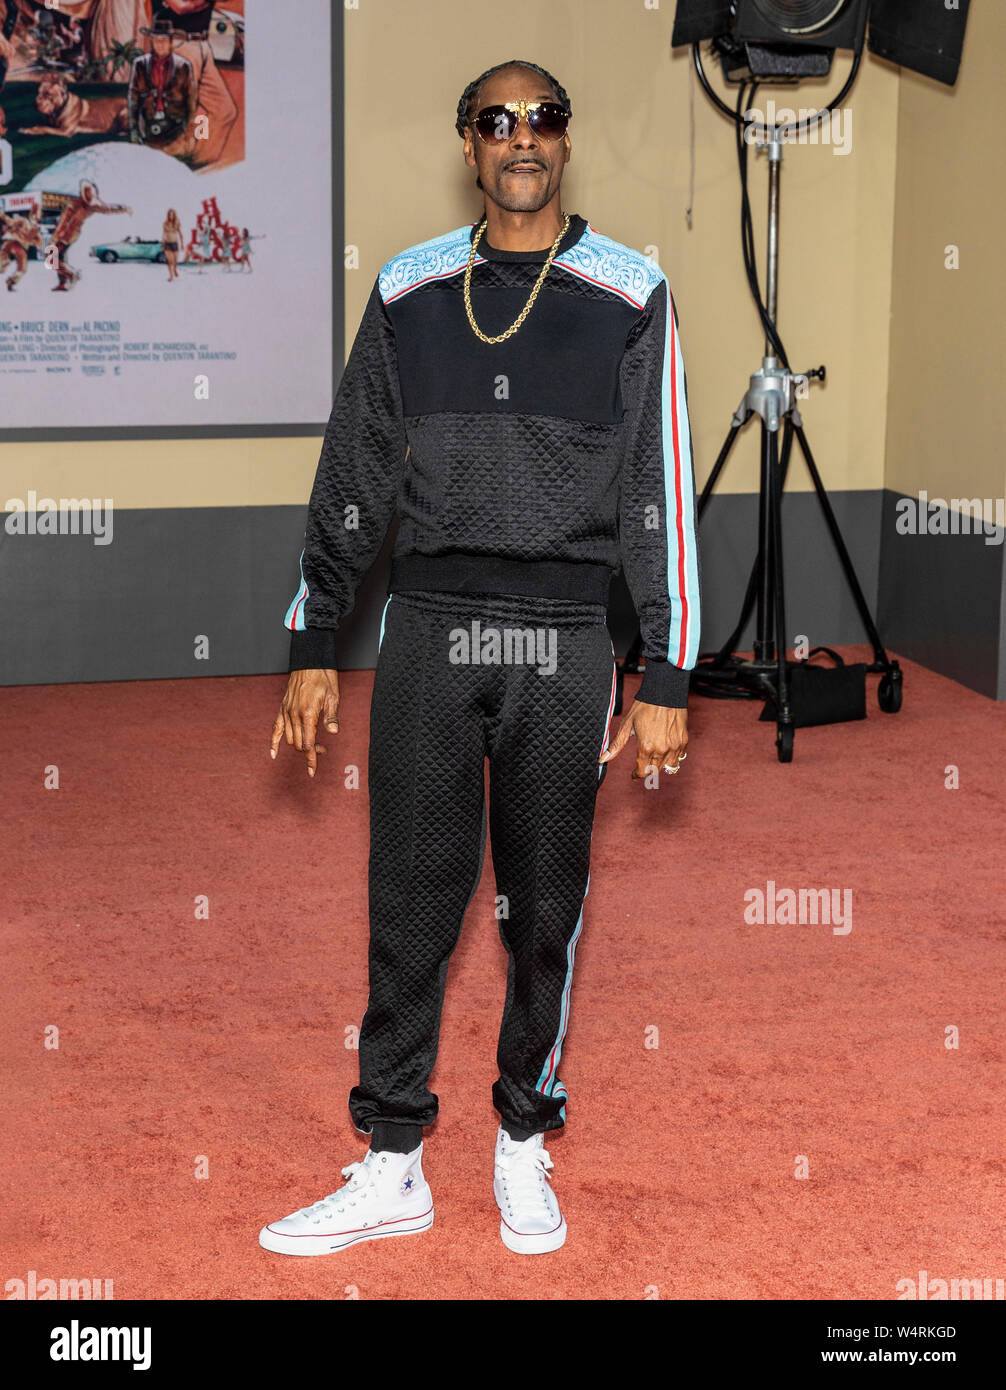 Los Angeles, CA - 22. Juli 2019: Snoop Dogg besucht die Los Angeles Premiere von "Once Upon a Time in Hollywood" bei TCL Chinese Theatre statt Stockfoto